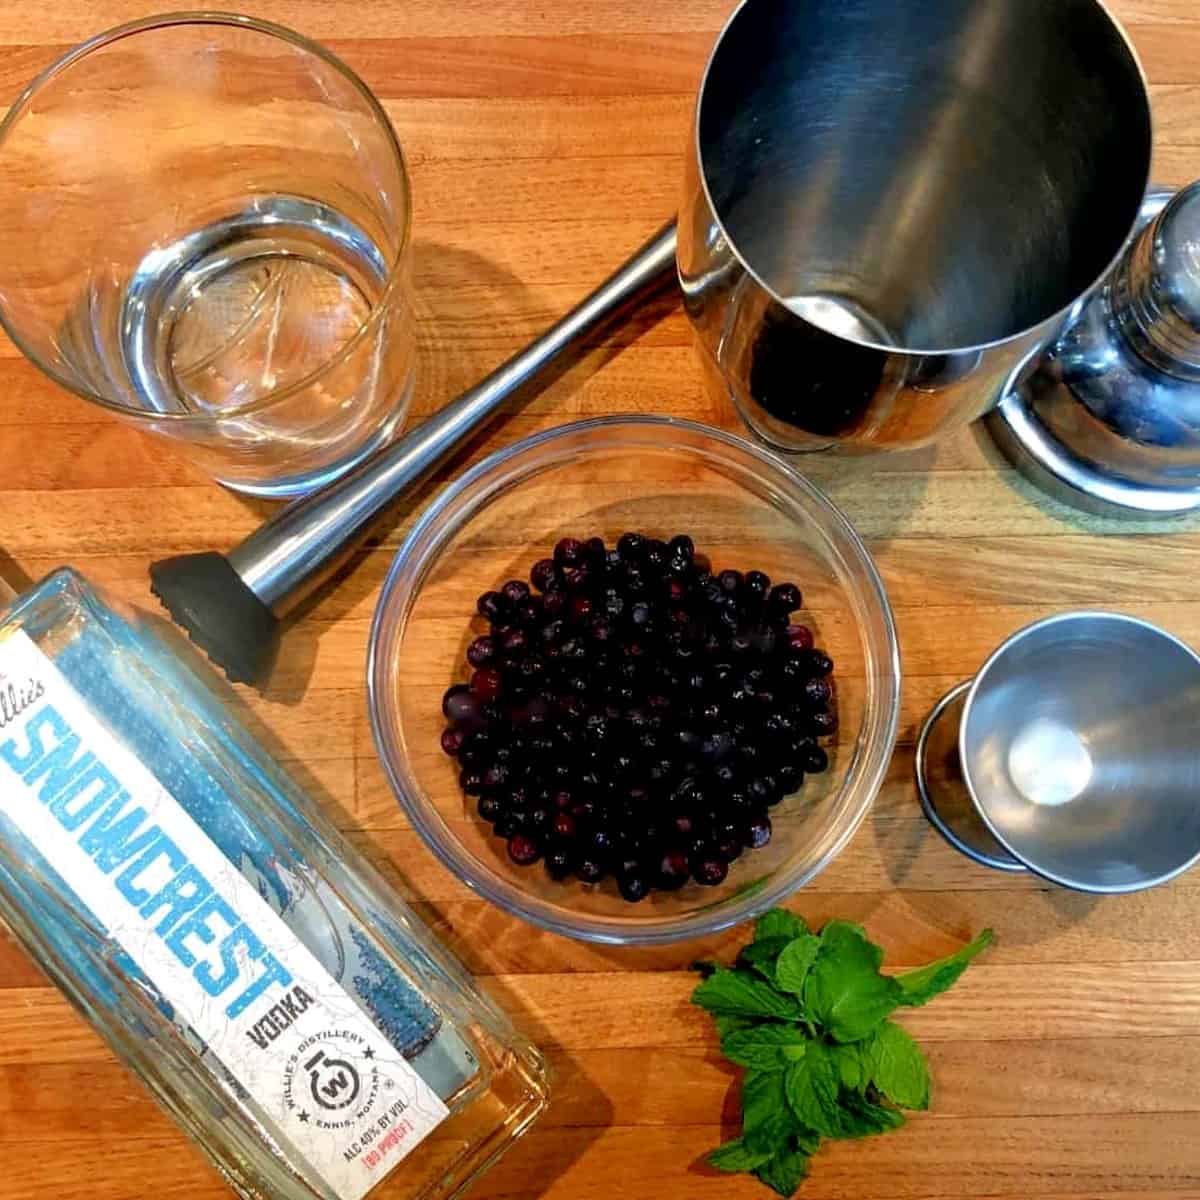 ingredients for huckleberry cocktail